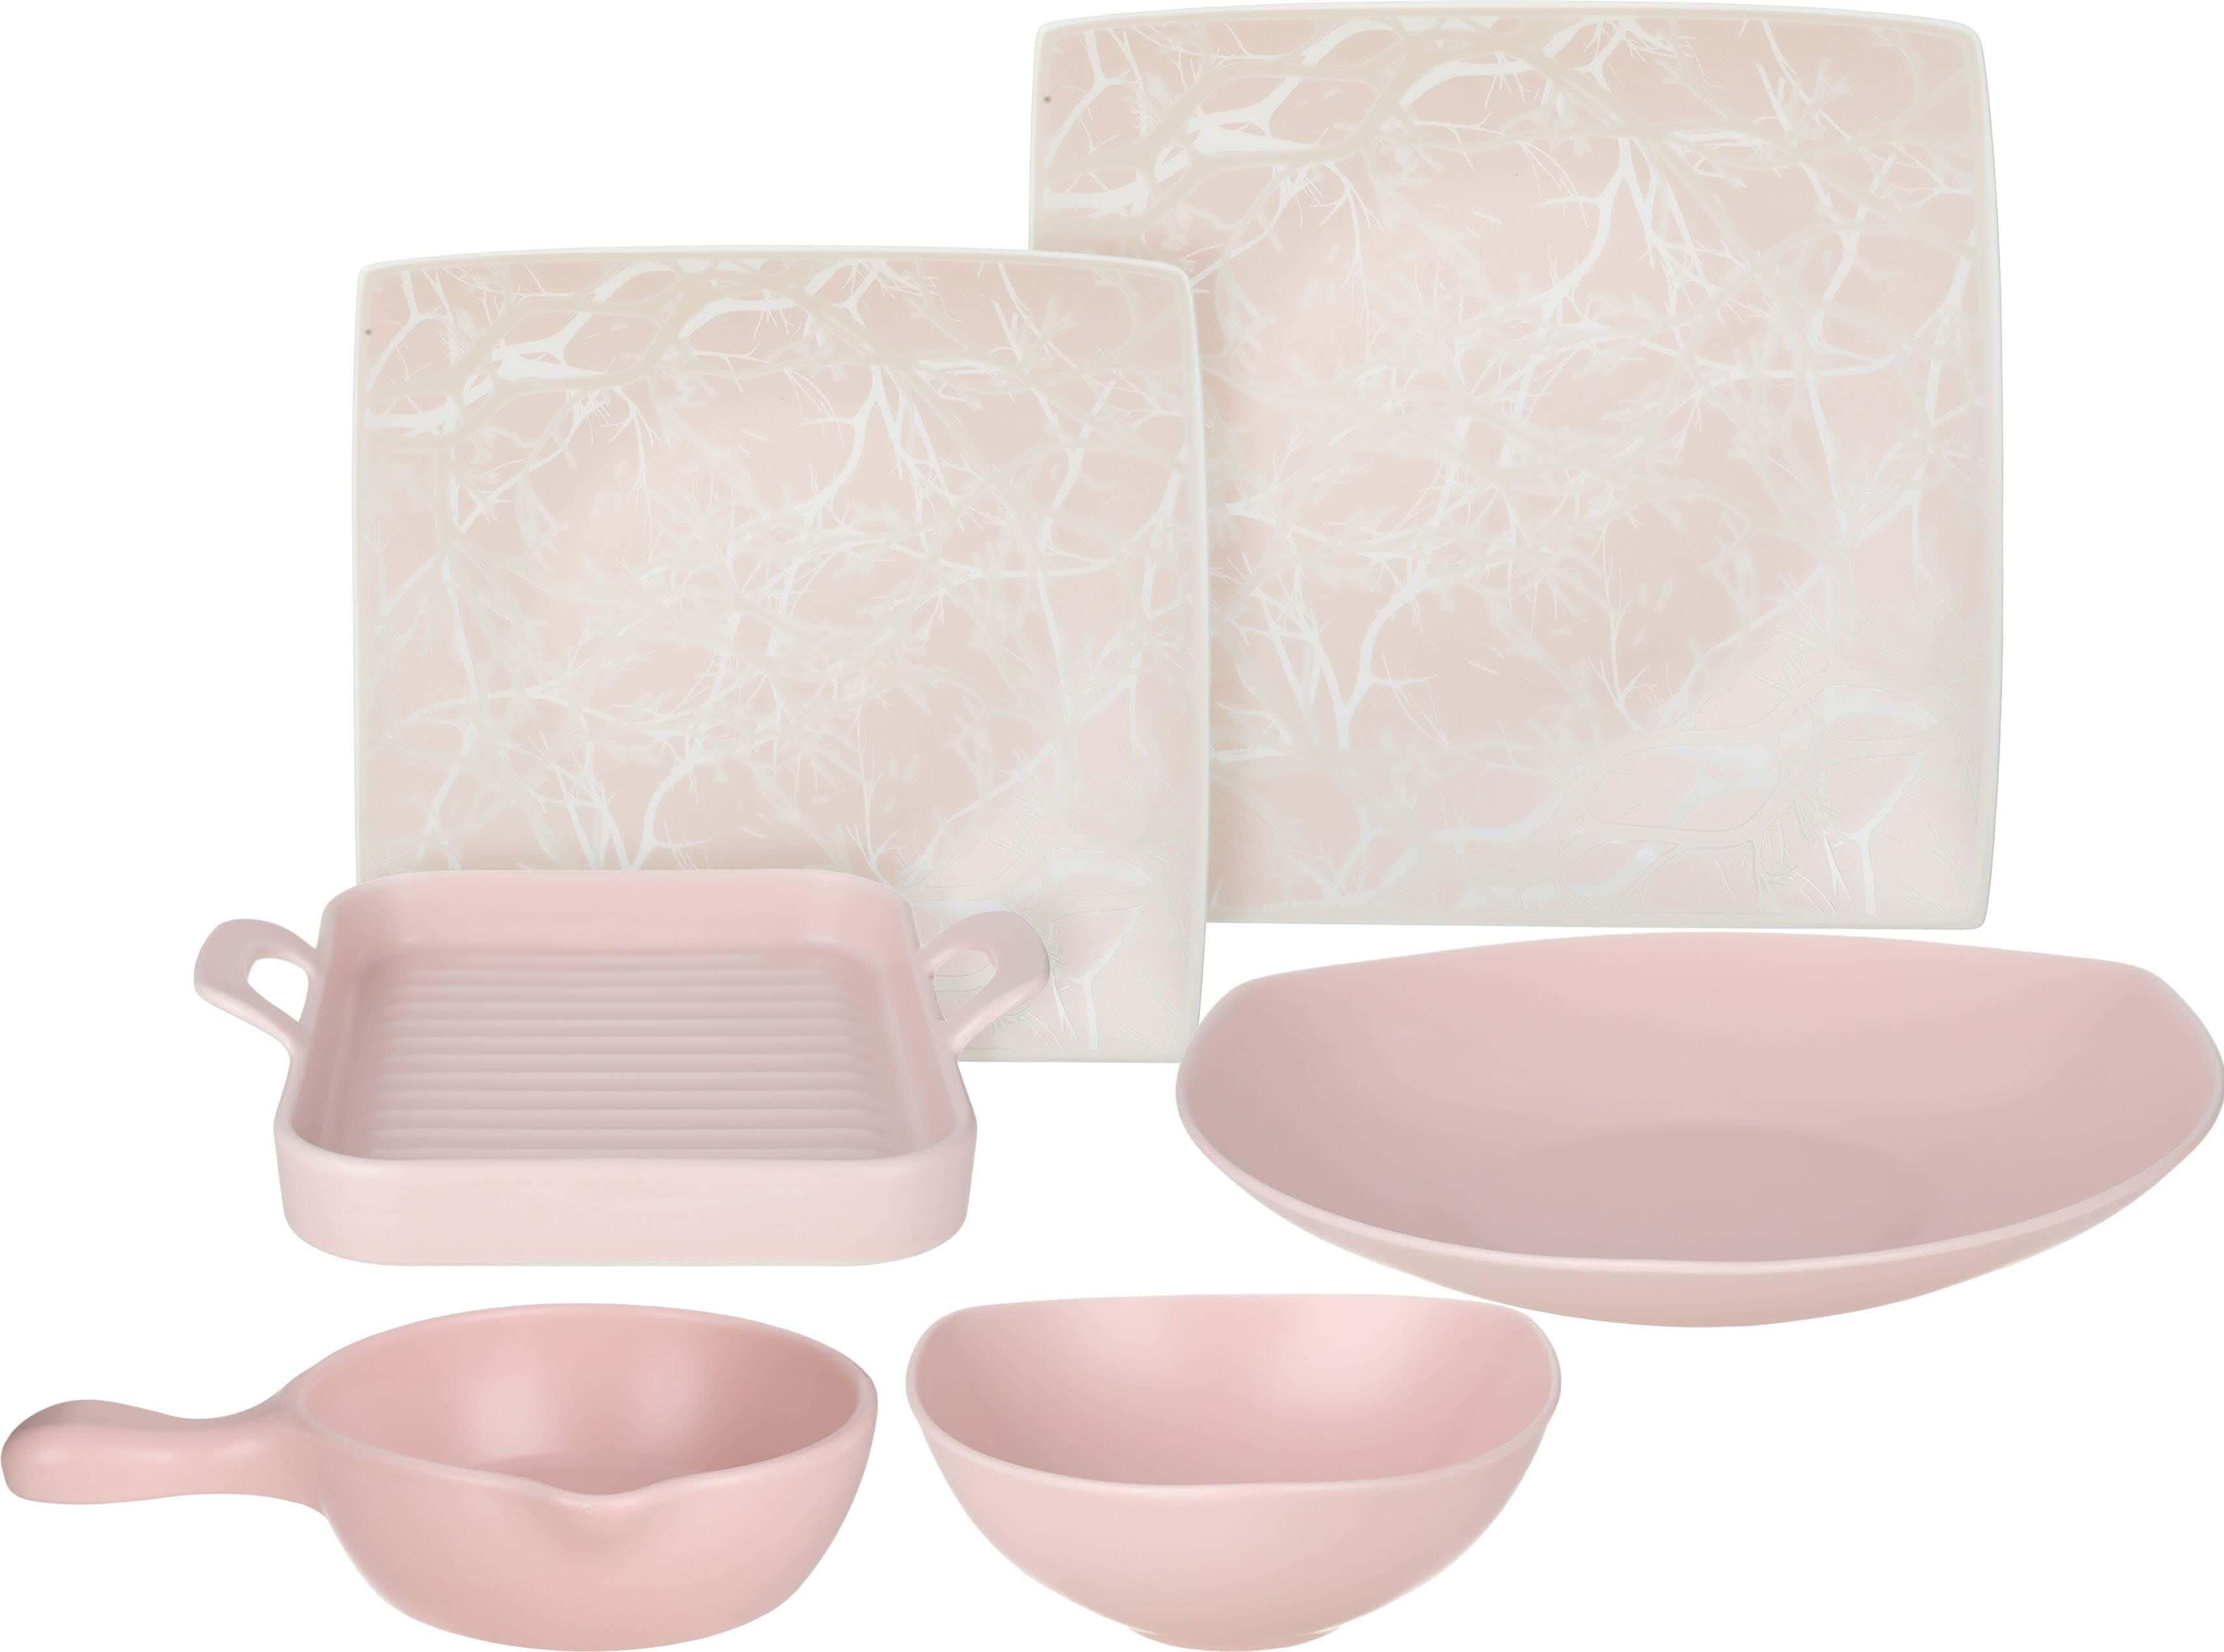 Get Lotus Porcelain Dinner Set, 26 Pieces - Cashmere with best offers | Raneen.com